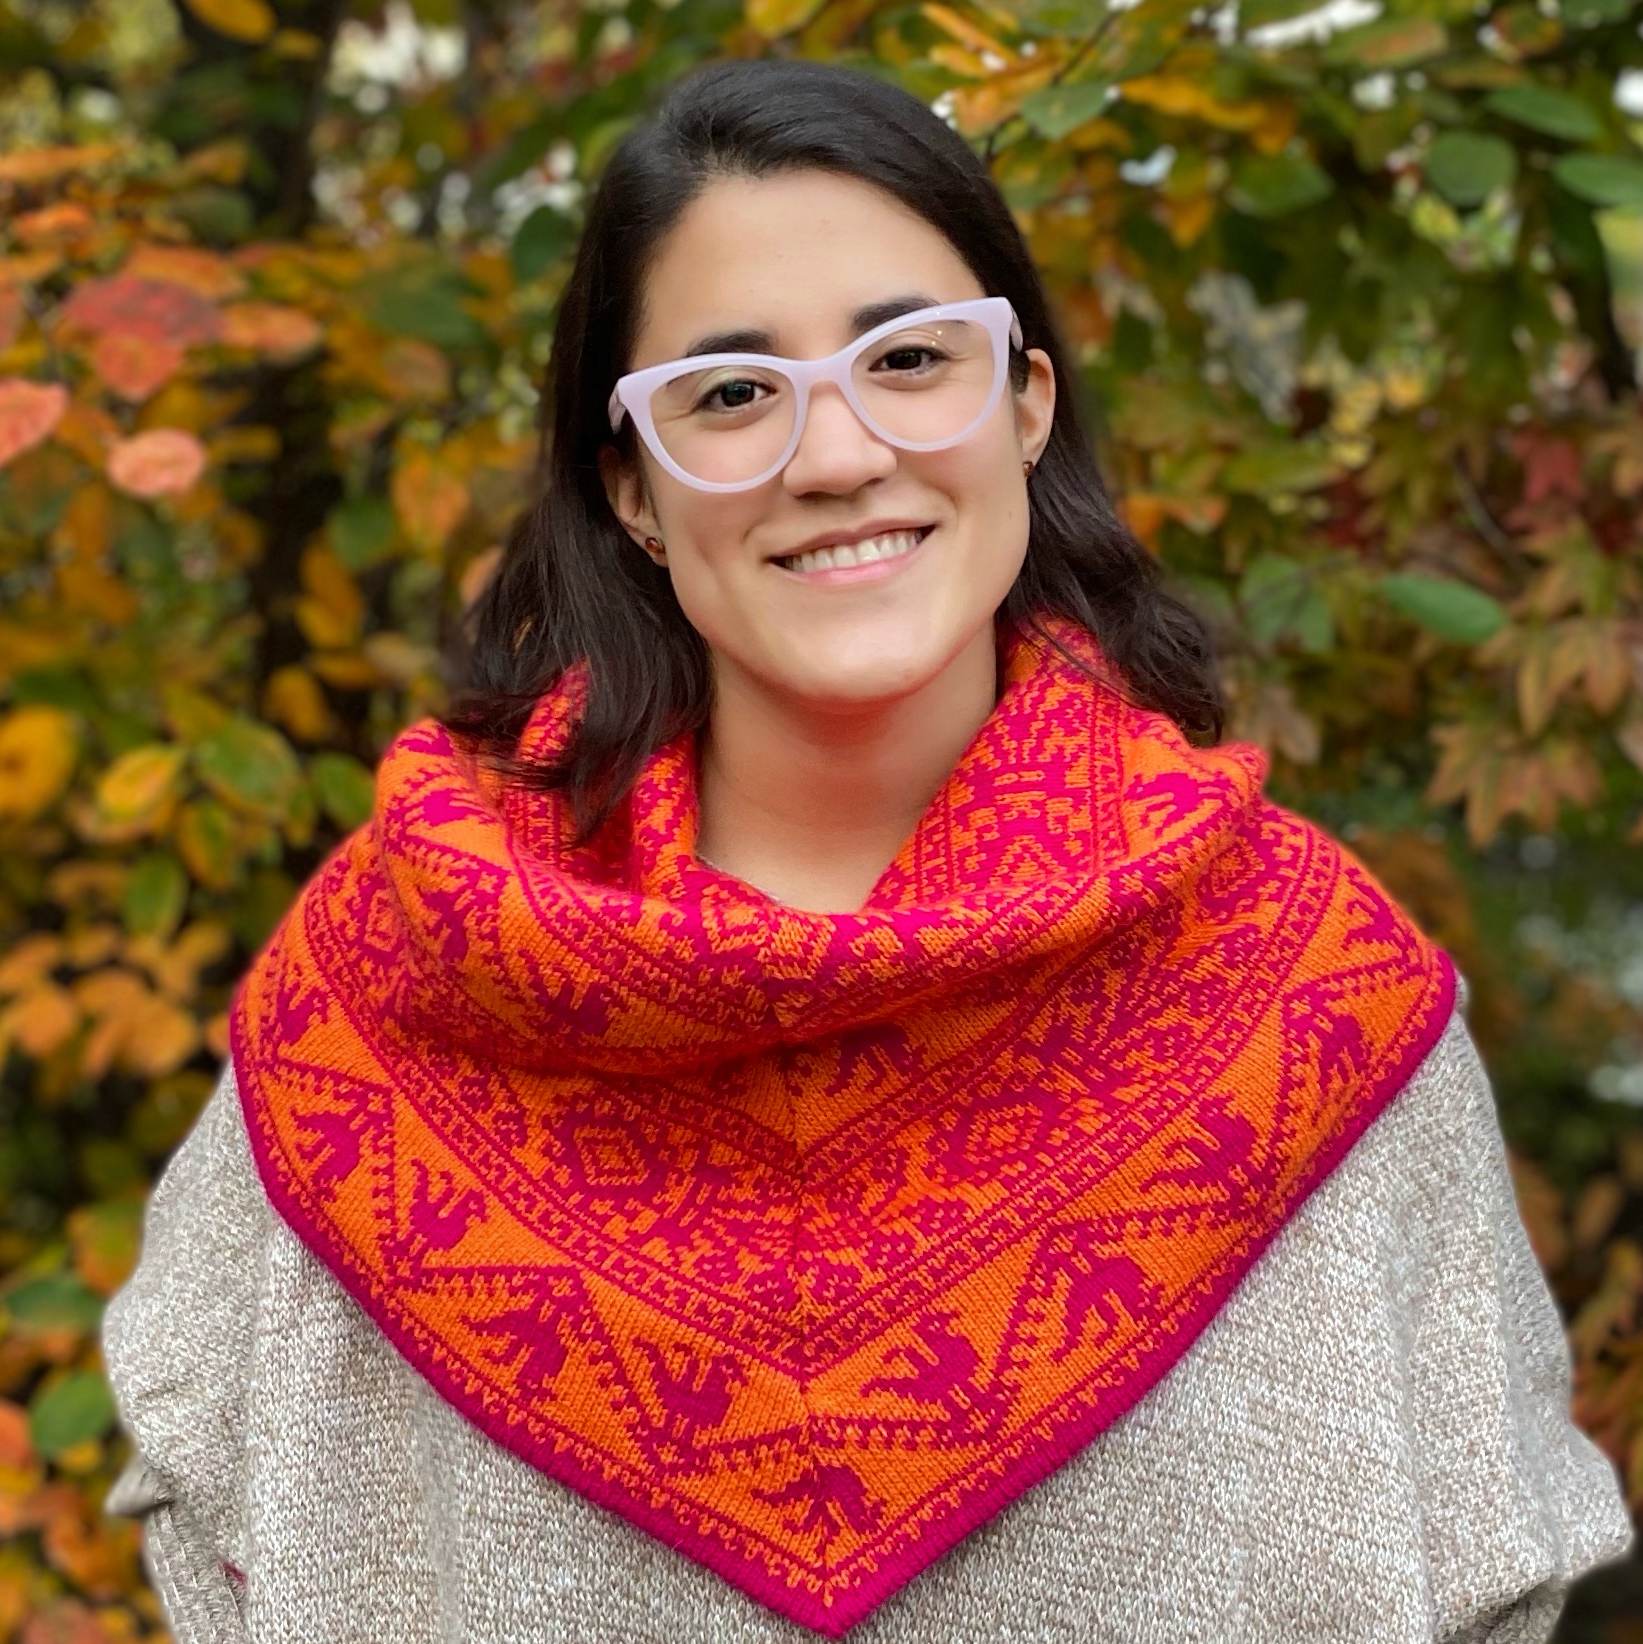 Andrea Román Alfaro in front of yellow and green leaves. There is a red and orange patterned scarf covering Andrea's shoulders and neck.